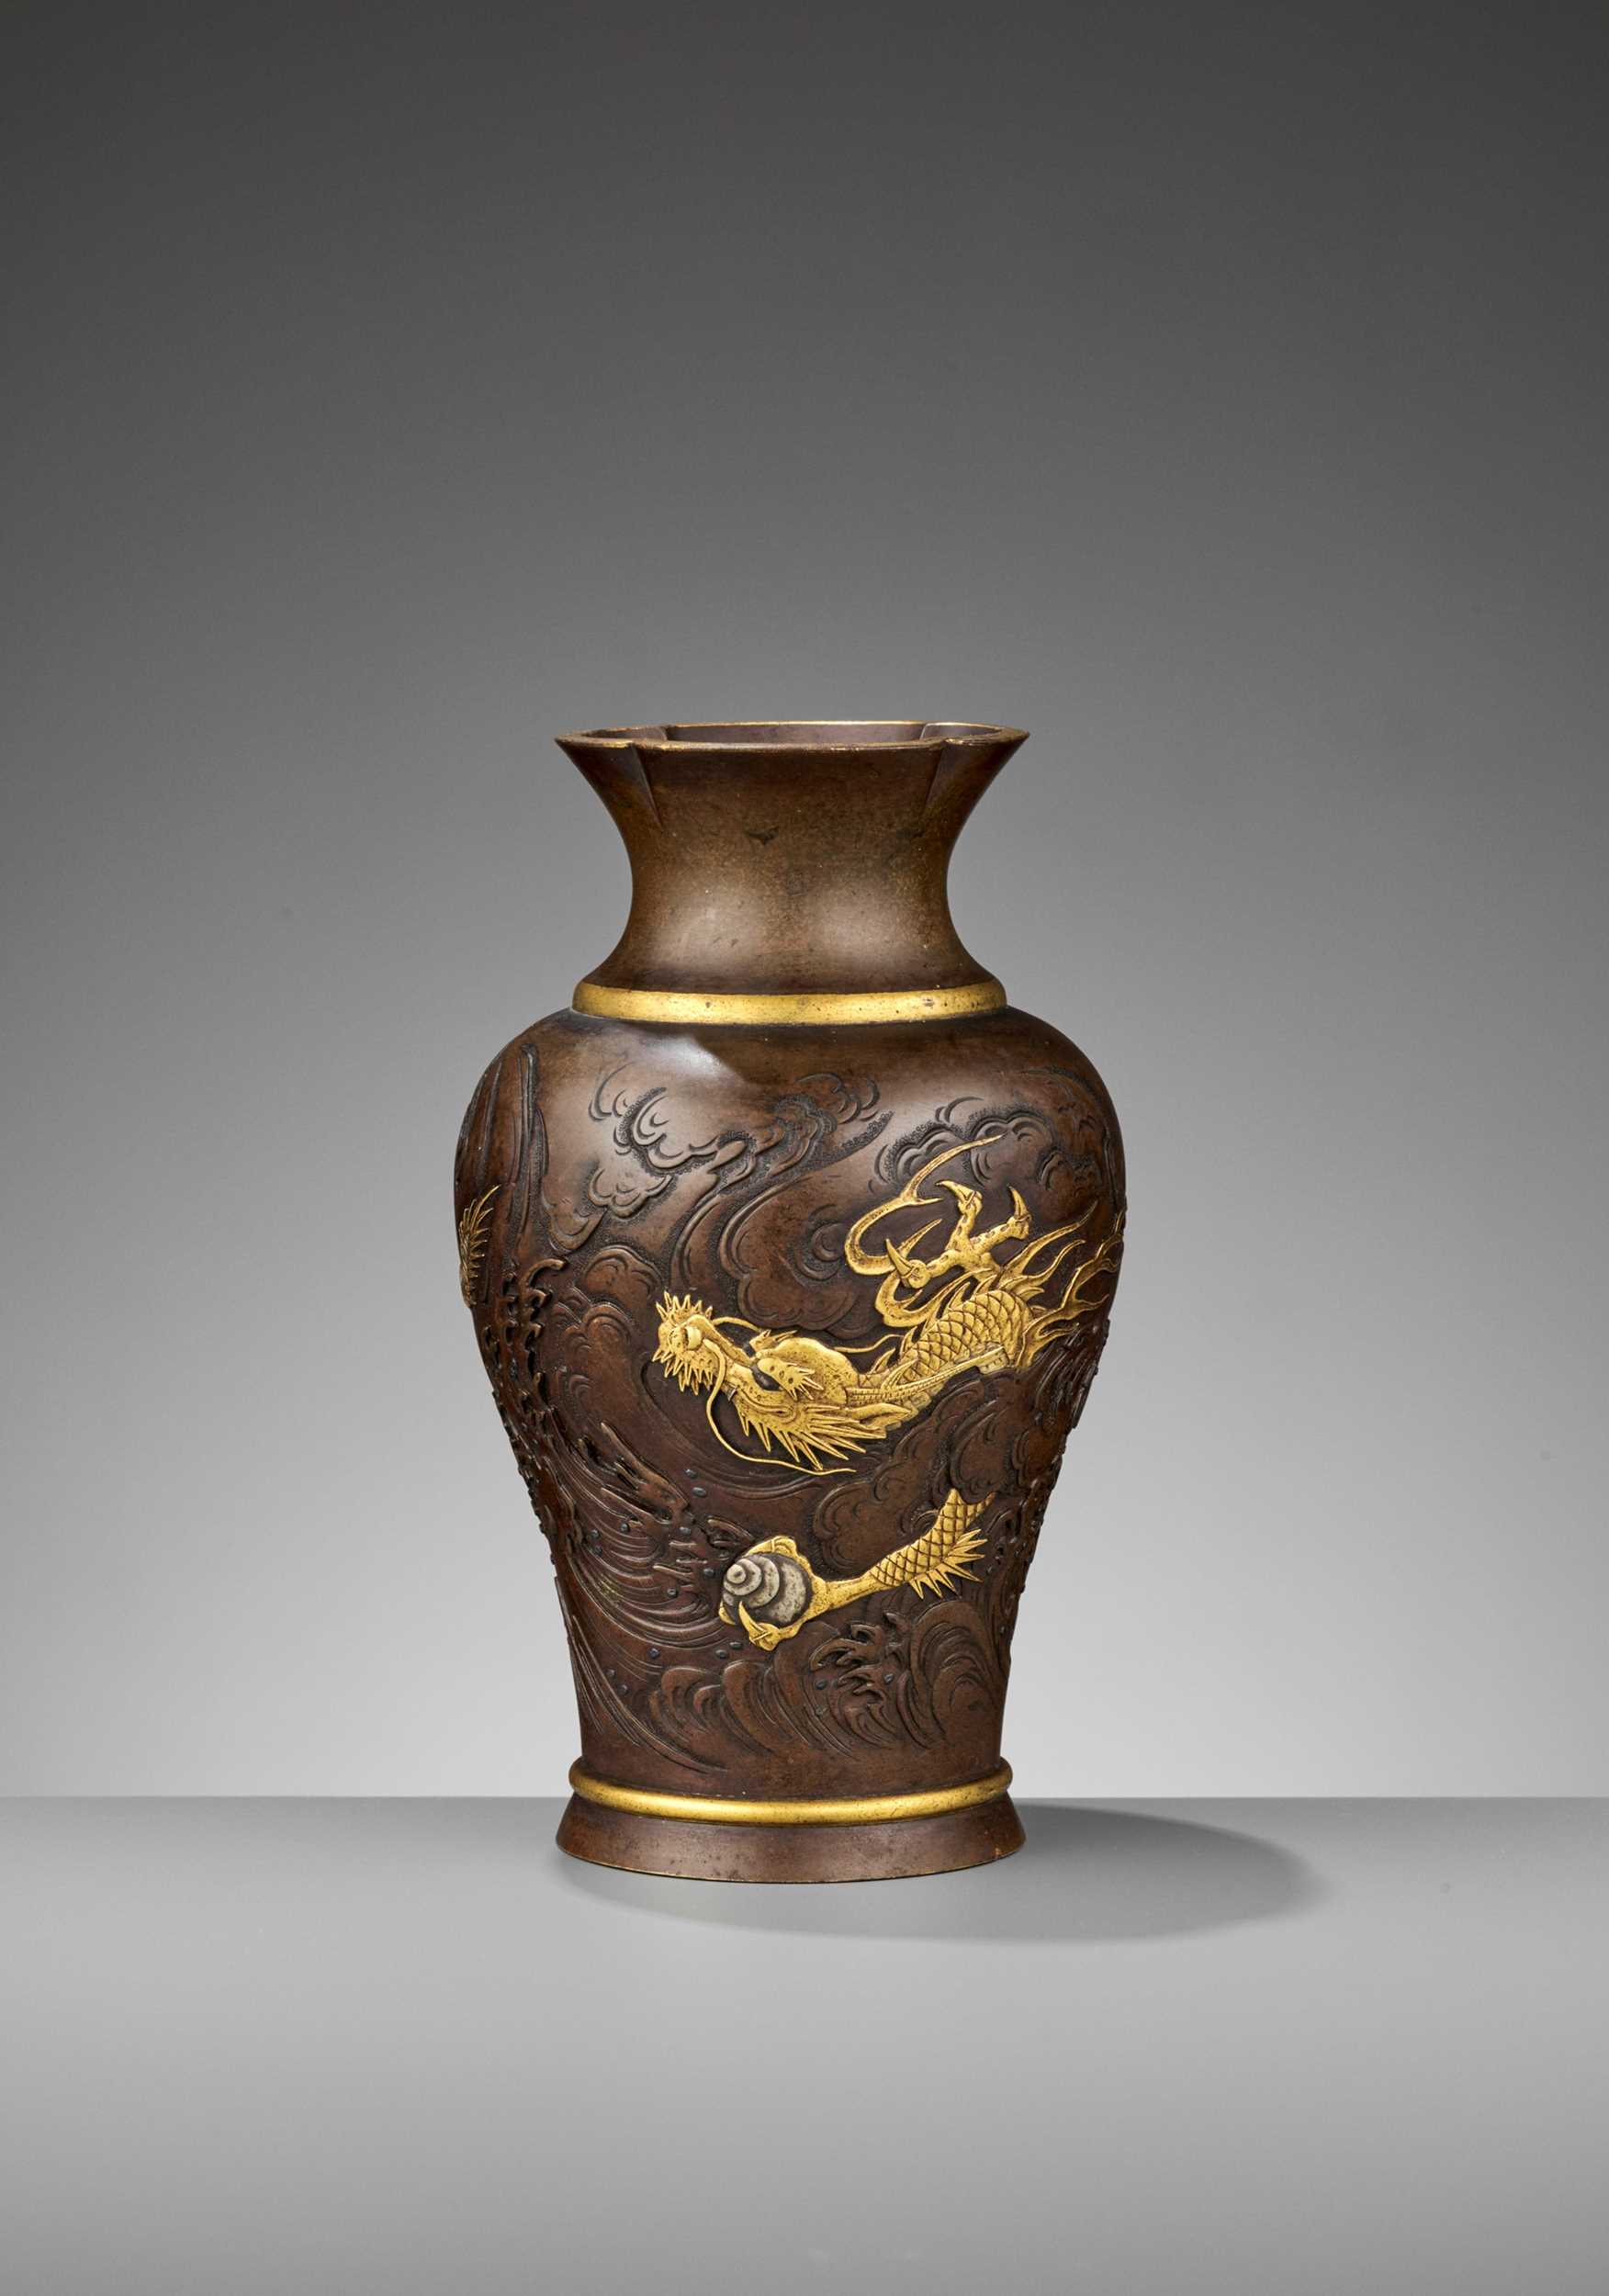 Lot 11 - A FINE MIYAO-STYLE GOLD AND SILVER-INLAID BRONZE ‘DRAGON’ VASE